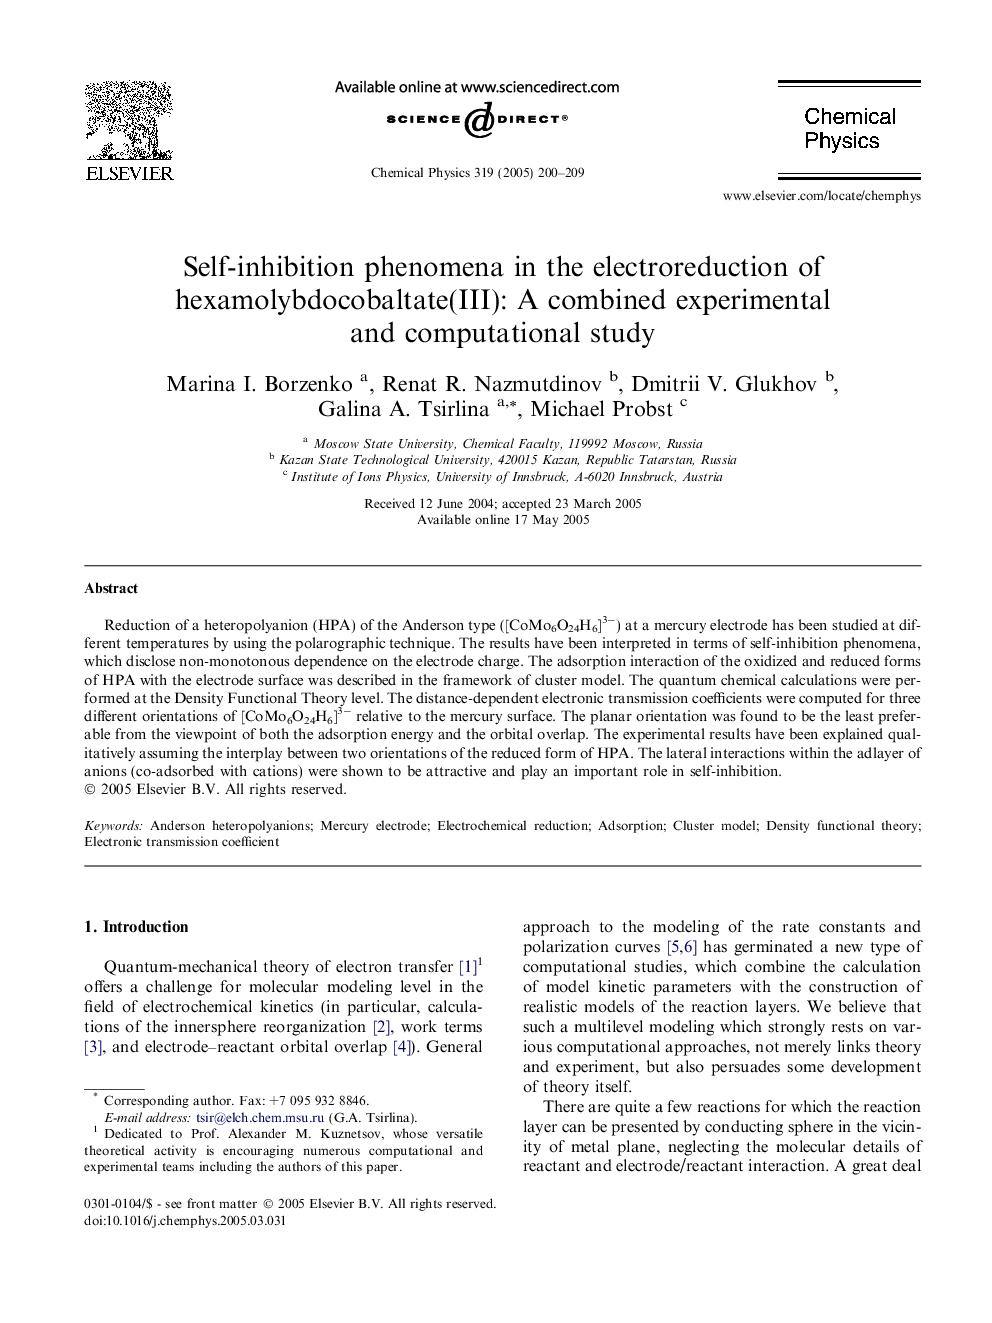 Self-inhibition phenomena in the electroreduction of hexamolybdocobaltate(III): A combined experimental and computational study